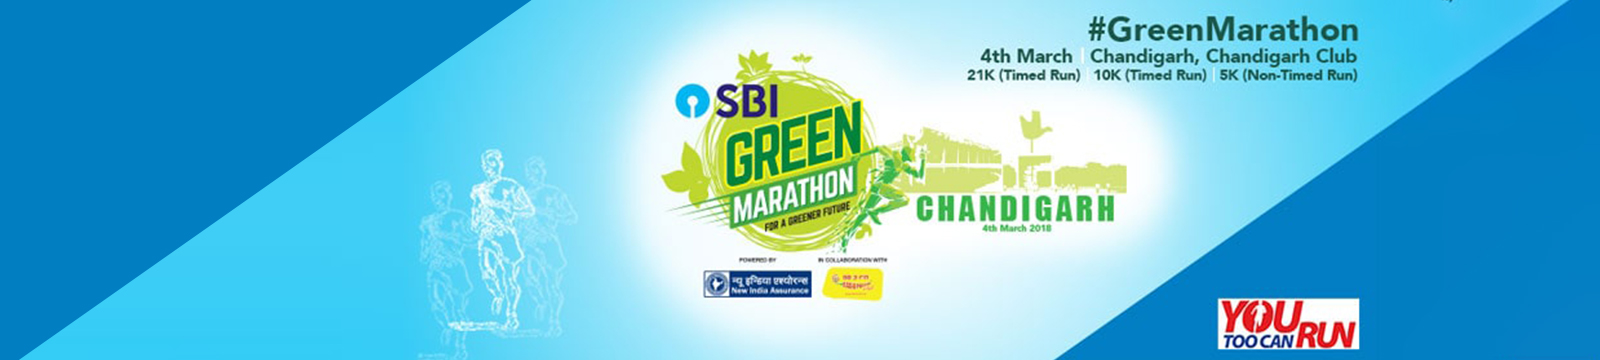 What Makes The SBI Green Marathon Different From Other Marathons